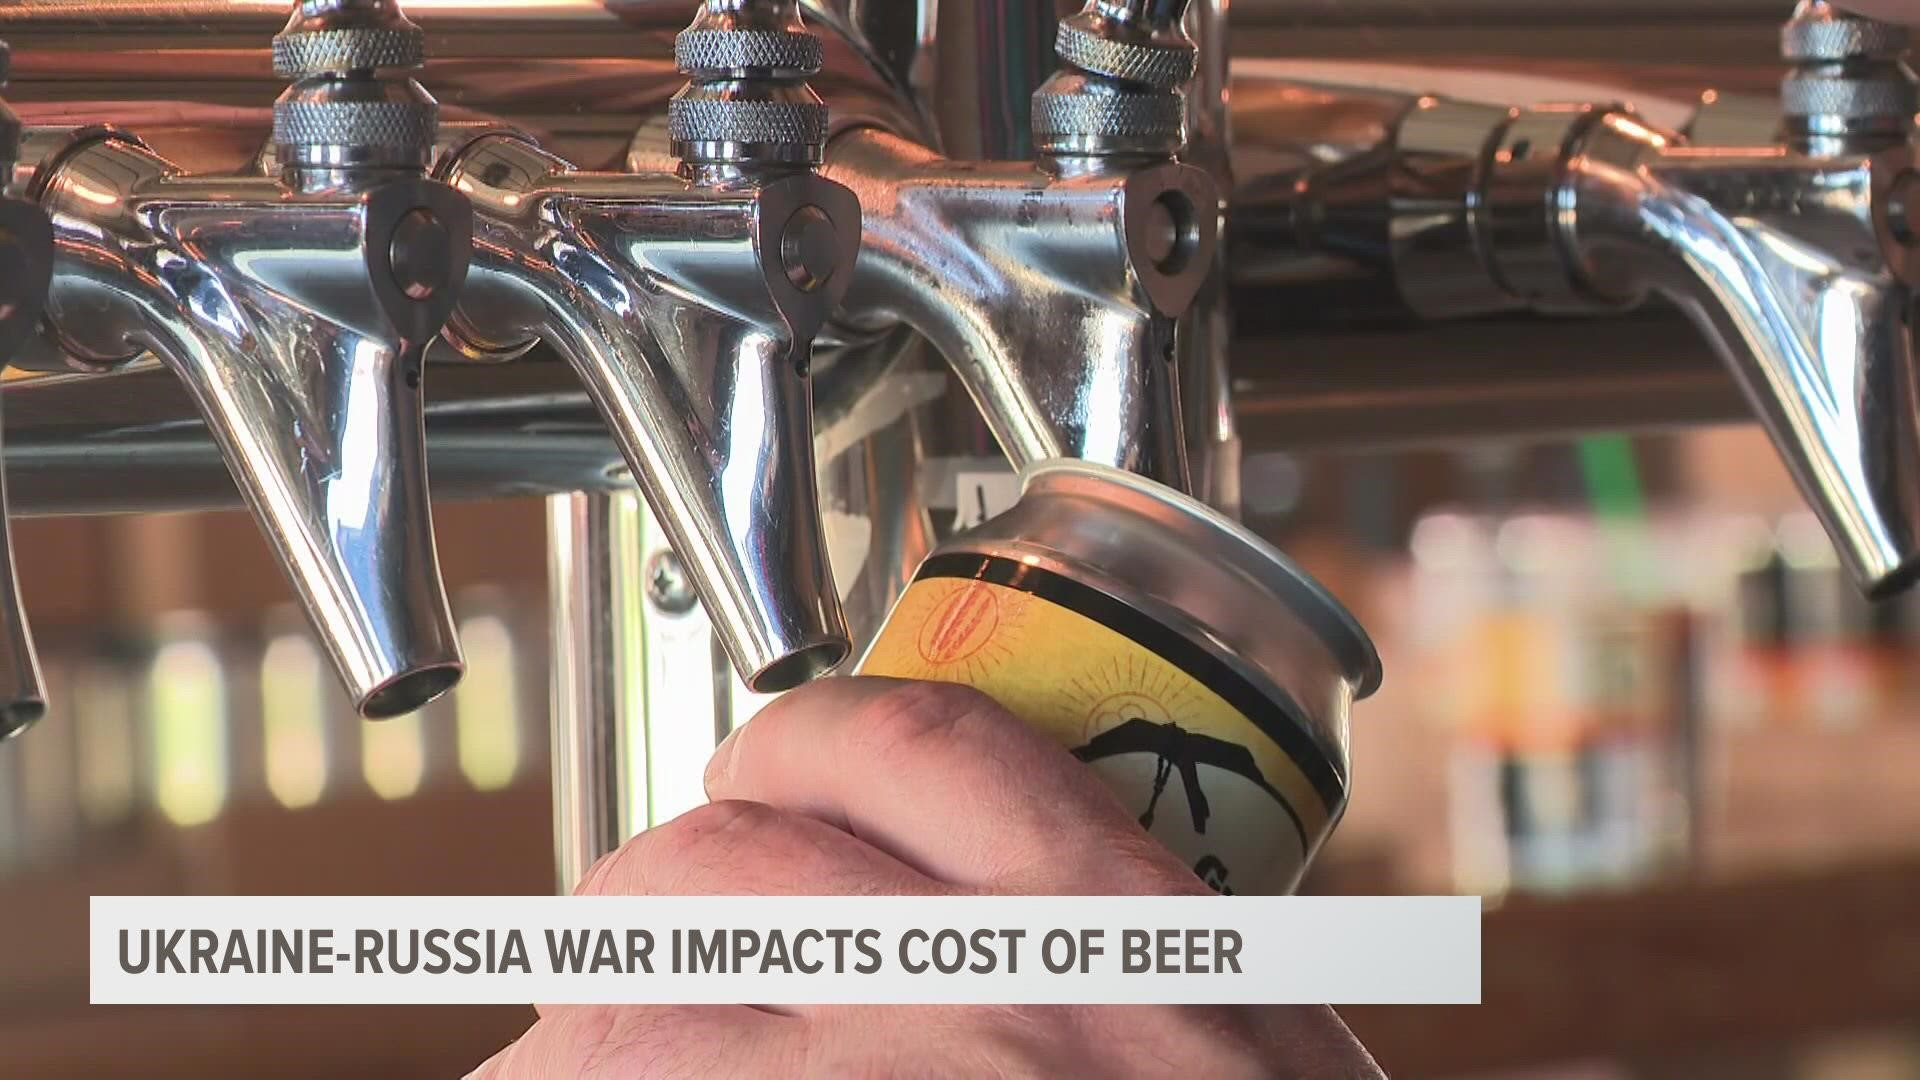 Grand Rapids is Beer City and if you've noticed you're paying more for a pint, the Russia-Ukraine war has something to do with it.